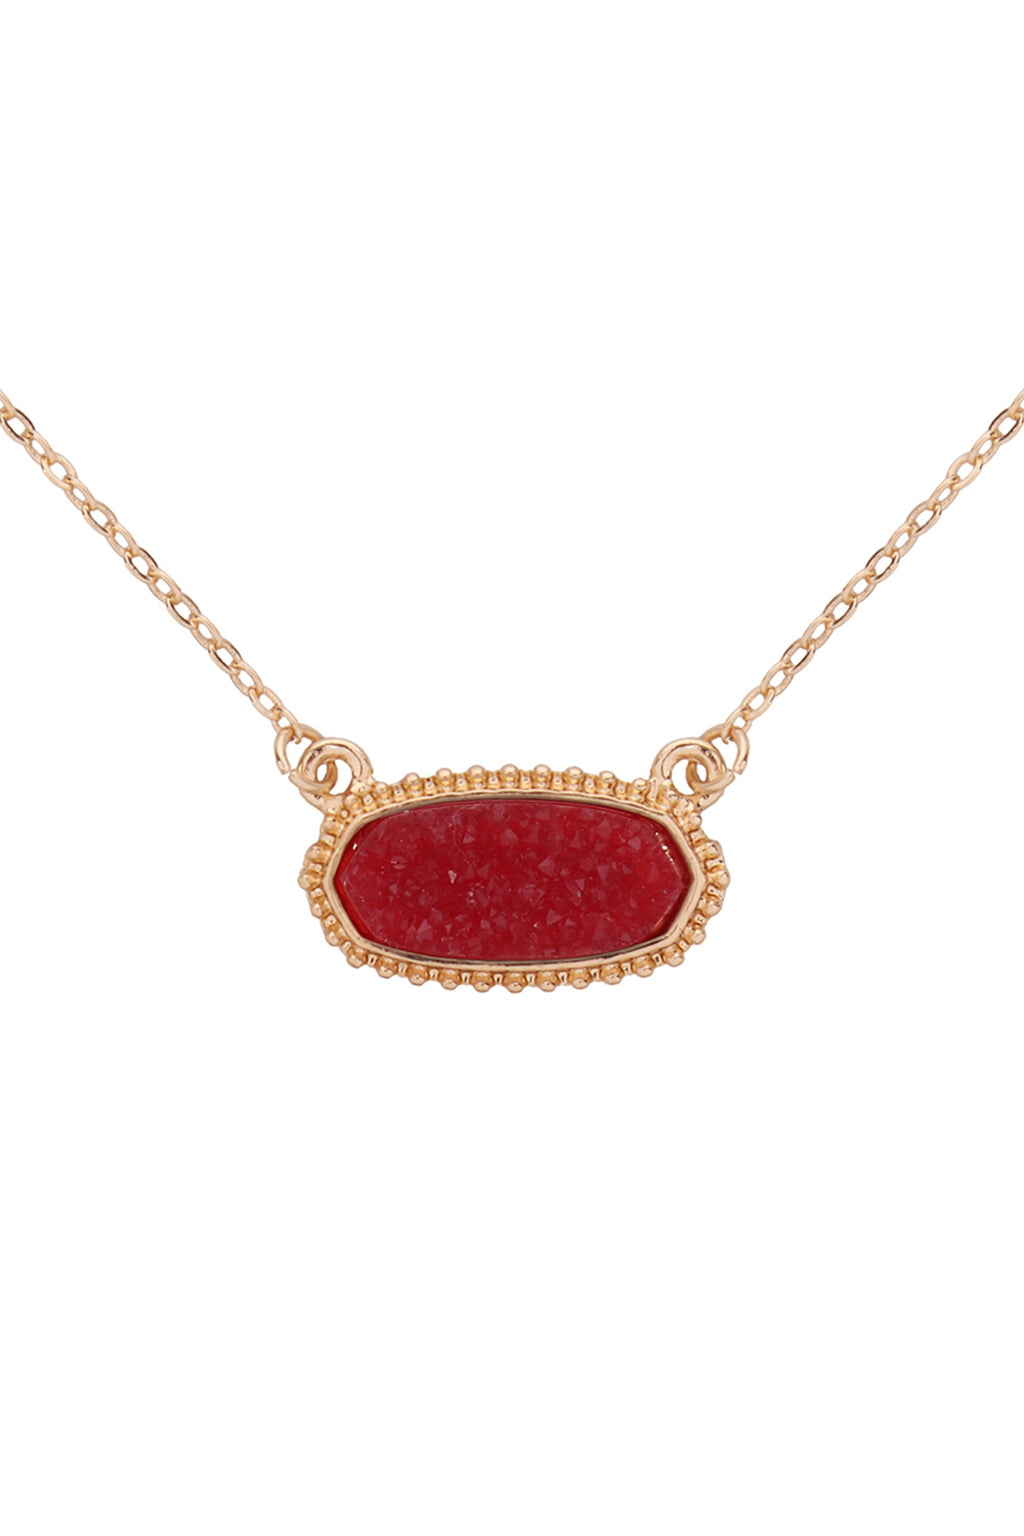 Red Druzy Oval Stone Pendant Necklace and Earring Set - Pack of 6